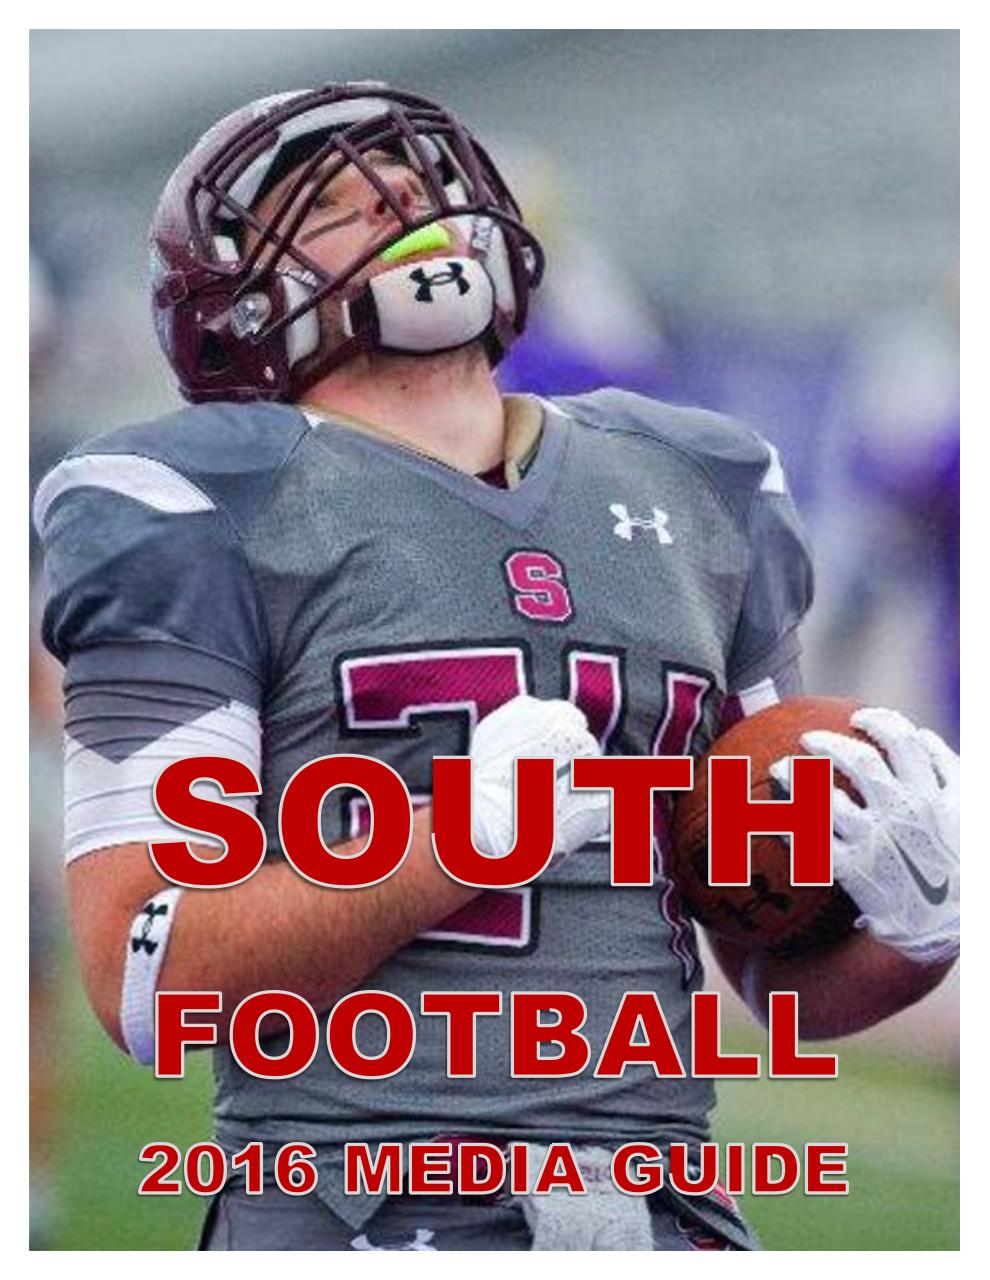 South Football 2016 Media Guide.pdf - page 1/44